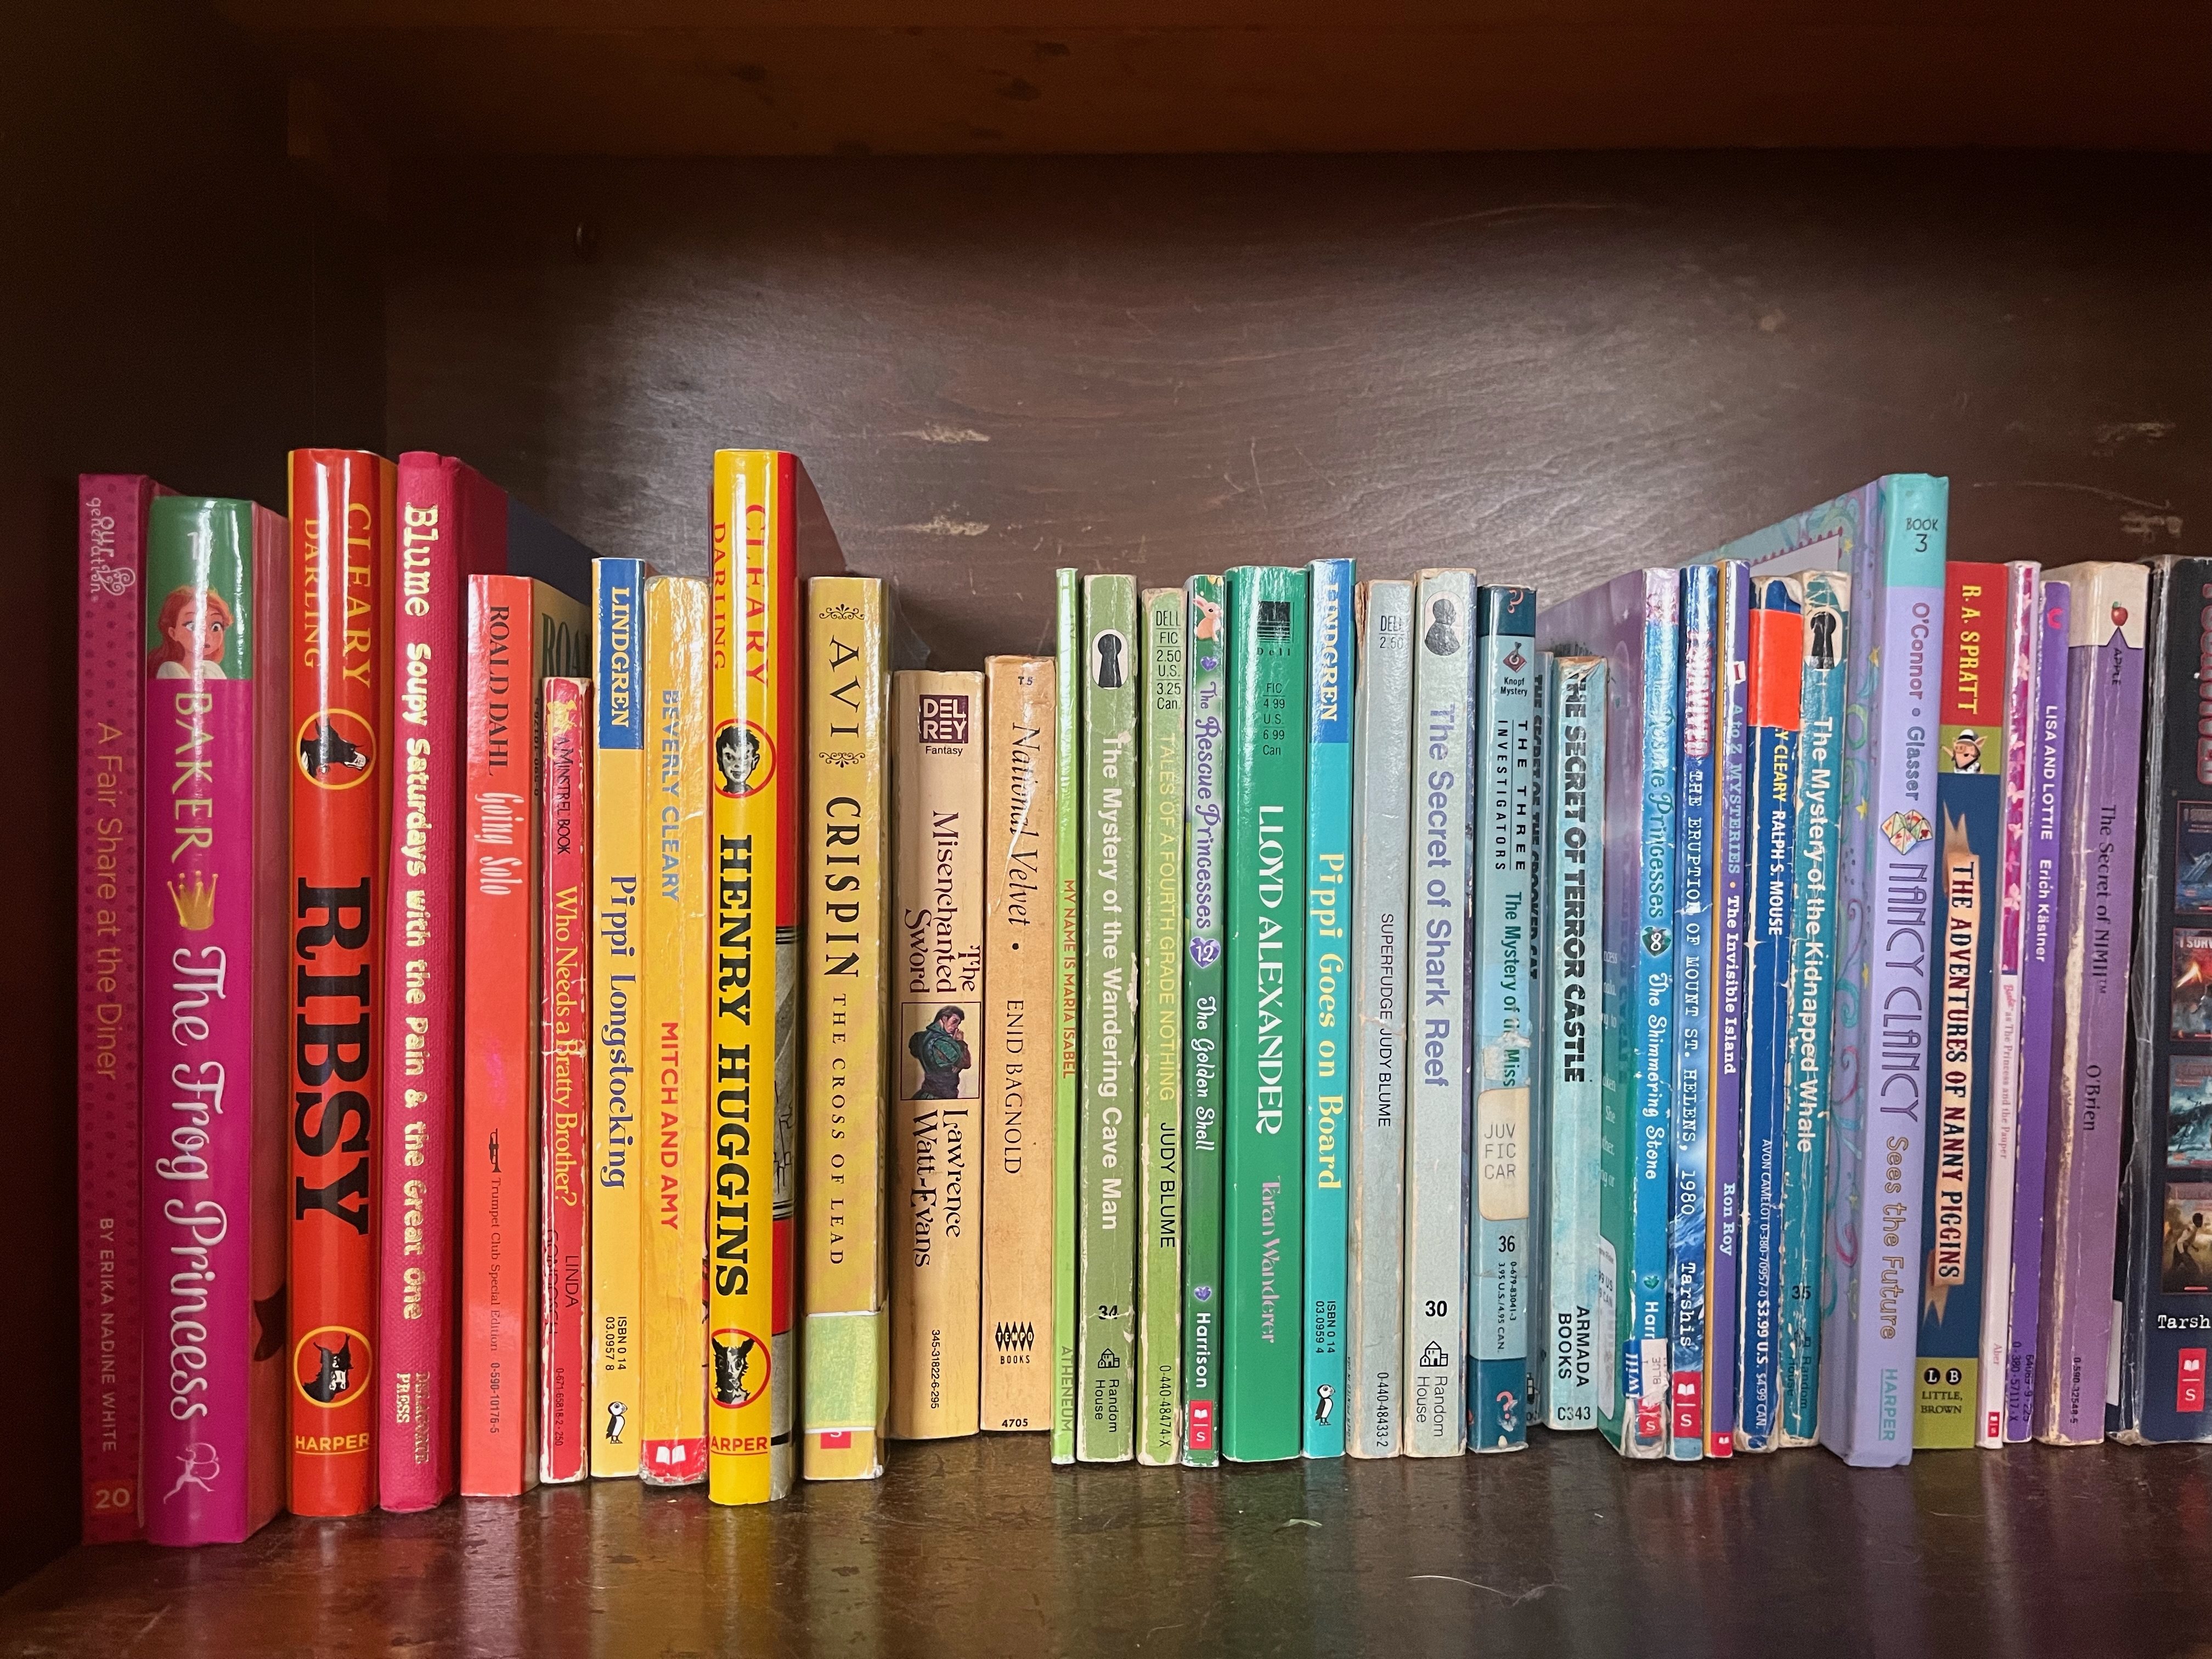 Try This Easy Way to Find New Books for Your Child